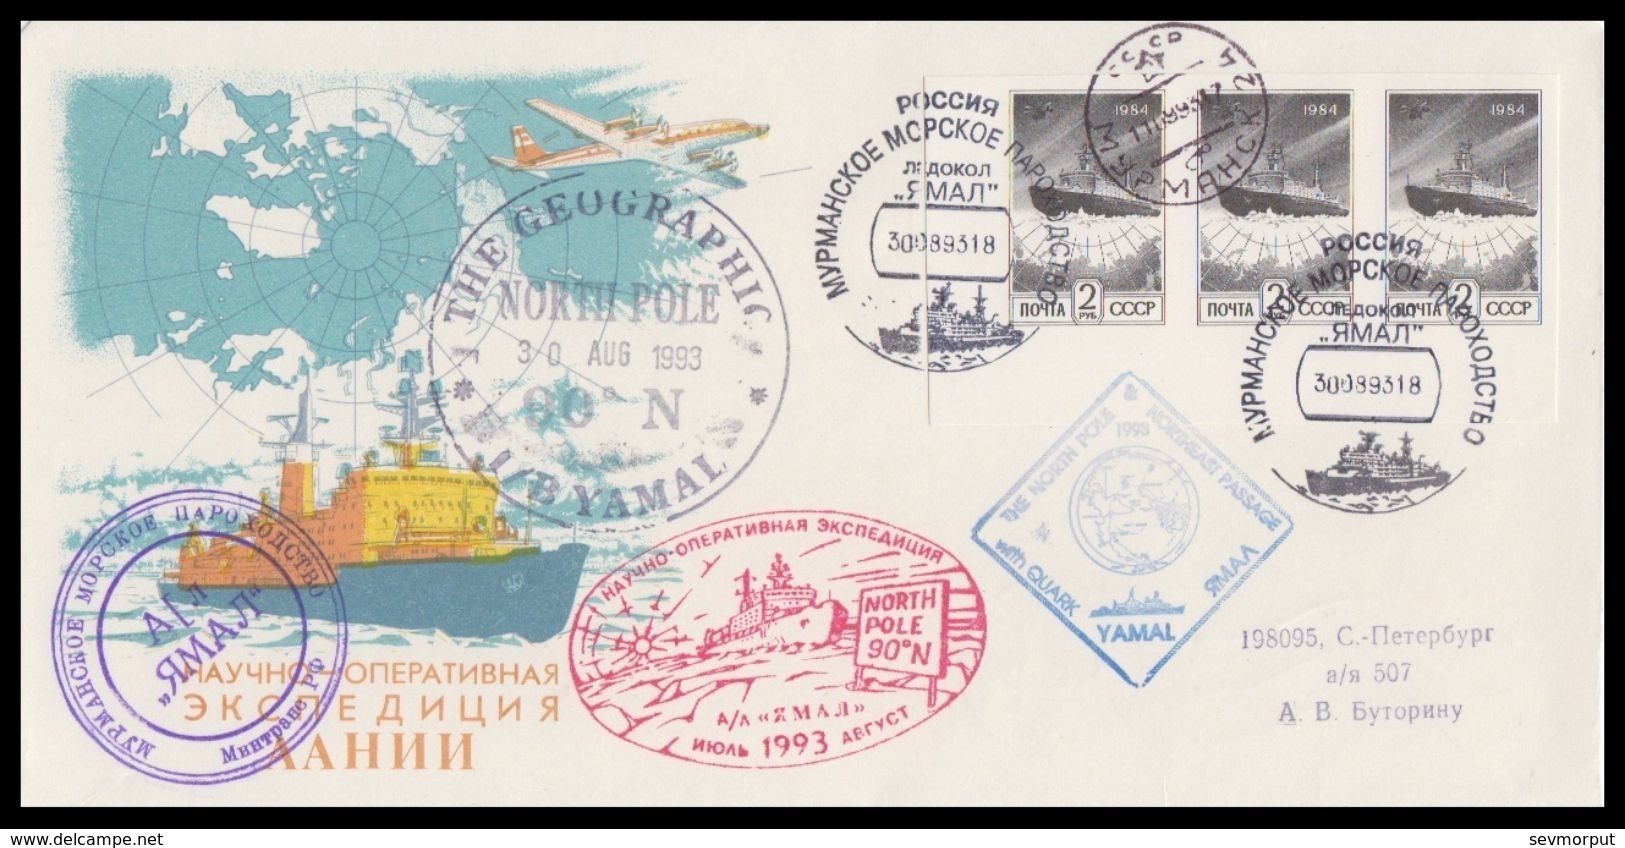 RUSSIA 1993 COVER Used NUCLEAR ICEBREAKER "YAMAL" NORTH POLE EXPEDITION ATOM ARCTIC AIRPLANE "IL-18" NORD POLAR Mailed - Expéditions Arctiques